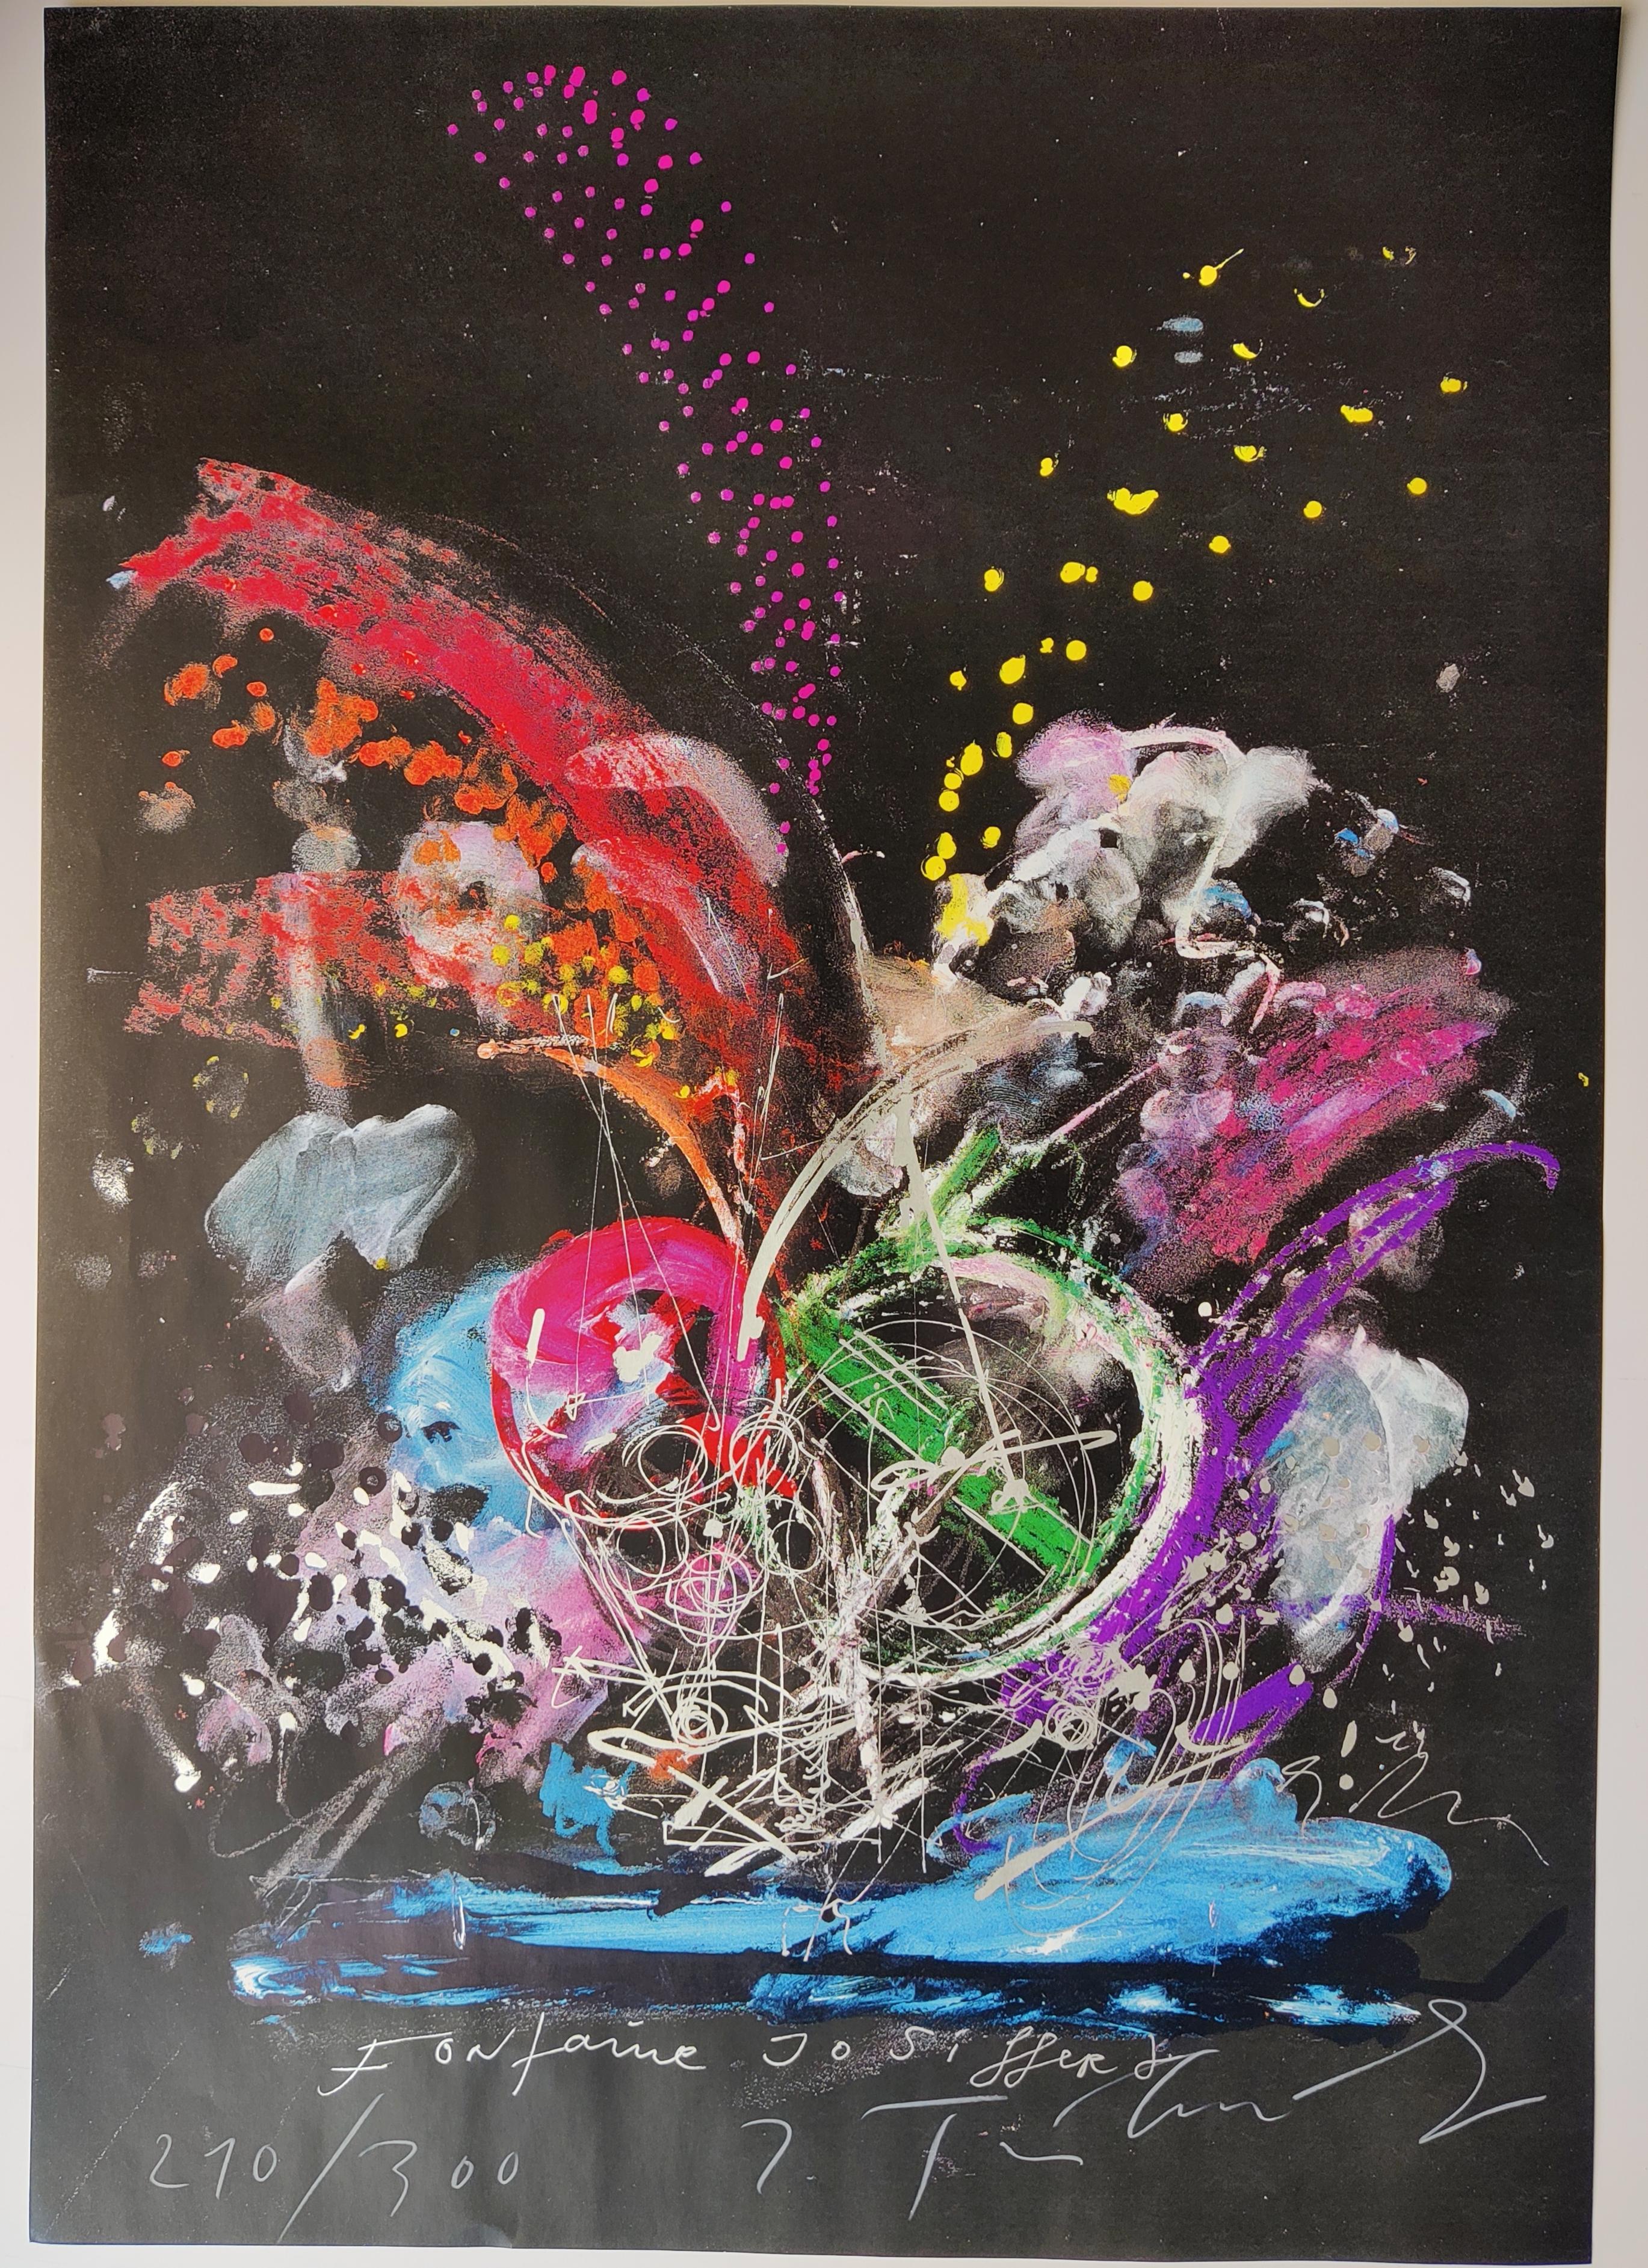 Jean Tinguely 
Fontaine Joe Syffert (from the Eight by Eight to Celebrate the Temporary Contemporary portfolio), 1984
Screenprint in colors on Technosil
Eidition 210/ 300 lower left 
Signed lower right
Printed by Albin Uldry Silkscreen, Bern,